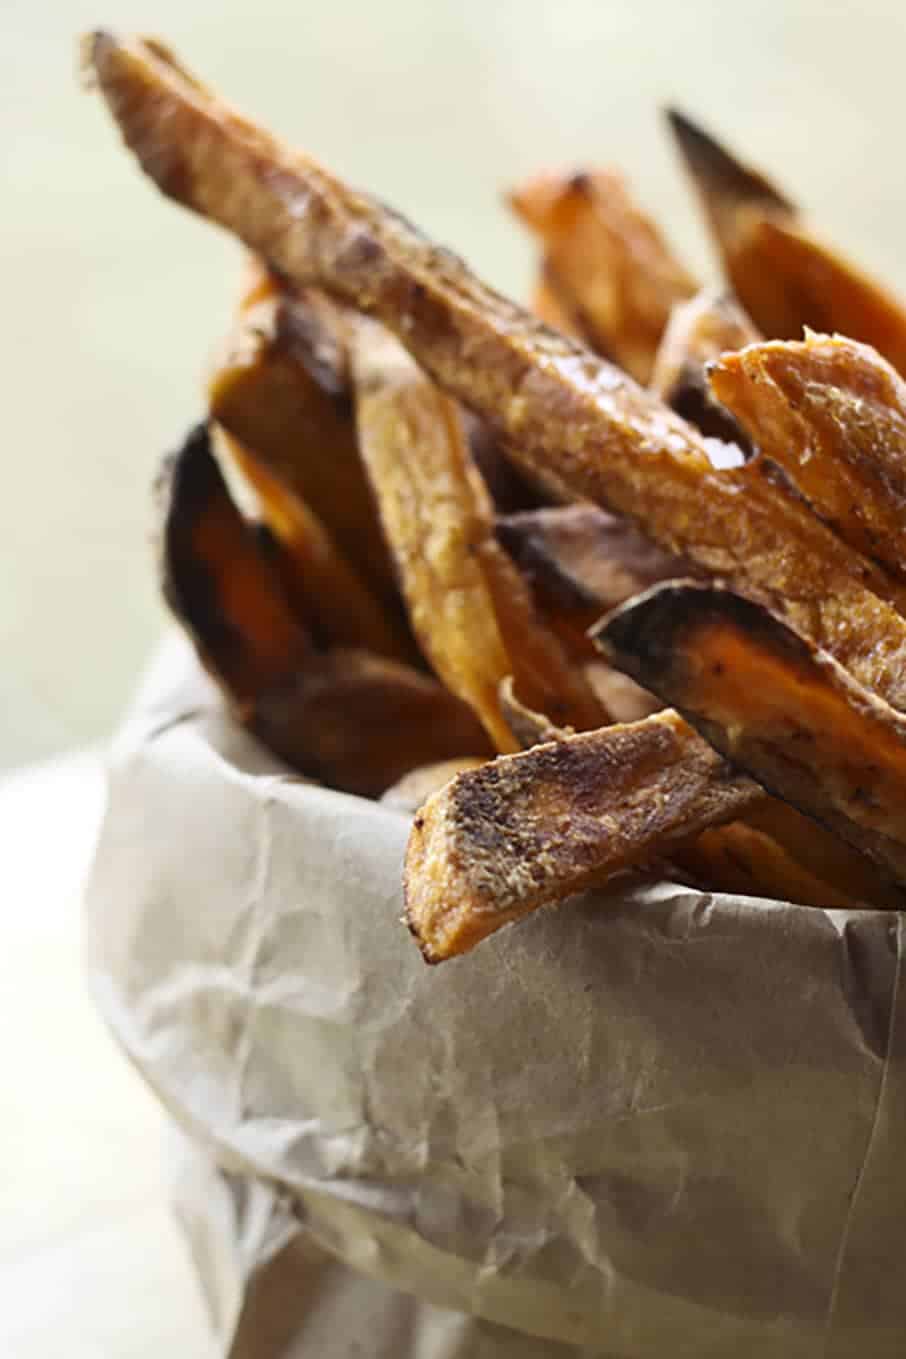 https://www.foodiewithfamily.com/wp-content/uploads/2014/04/Baked-Sweet-Potato-Fries-3.jpg